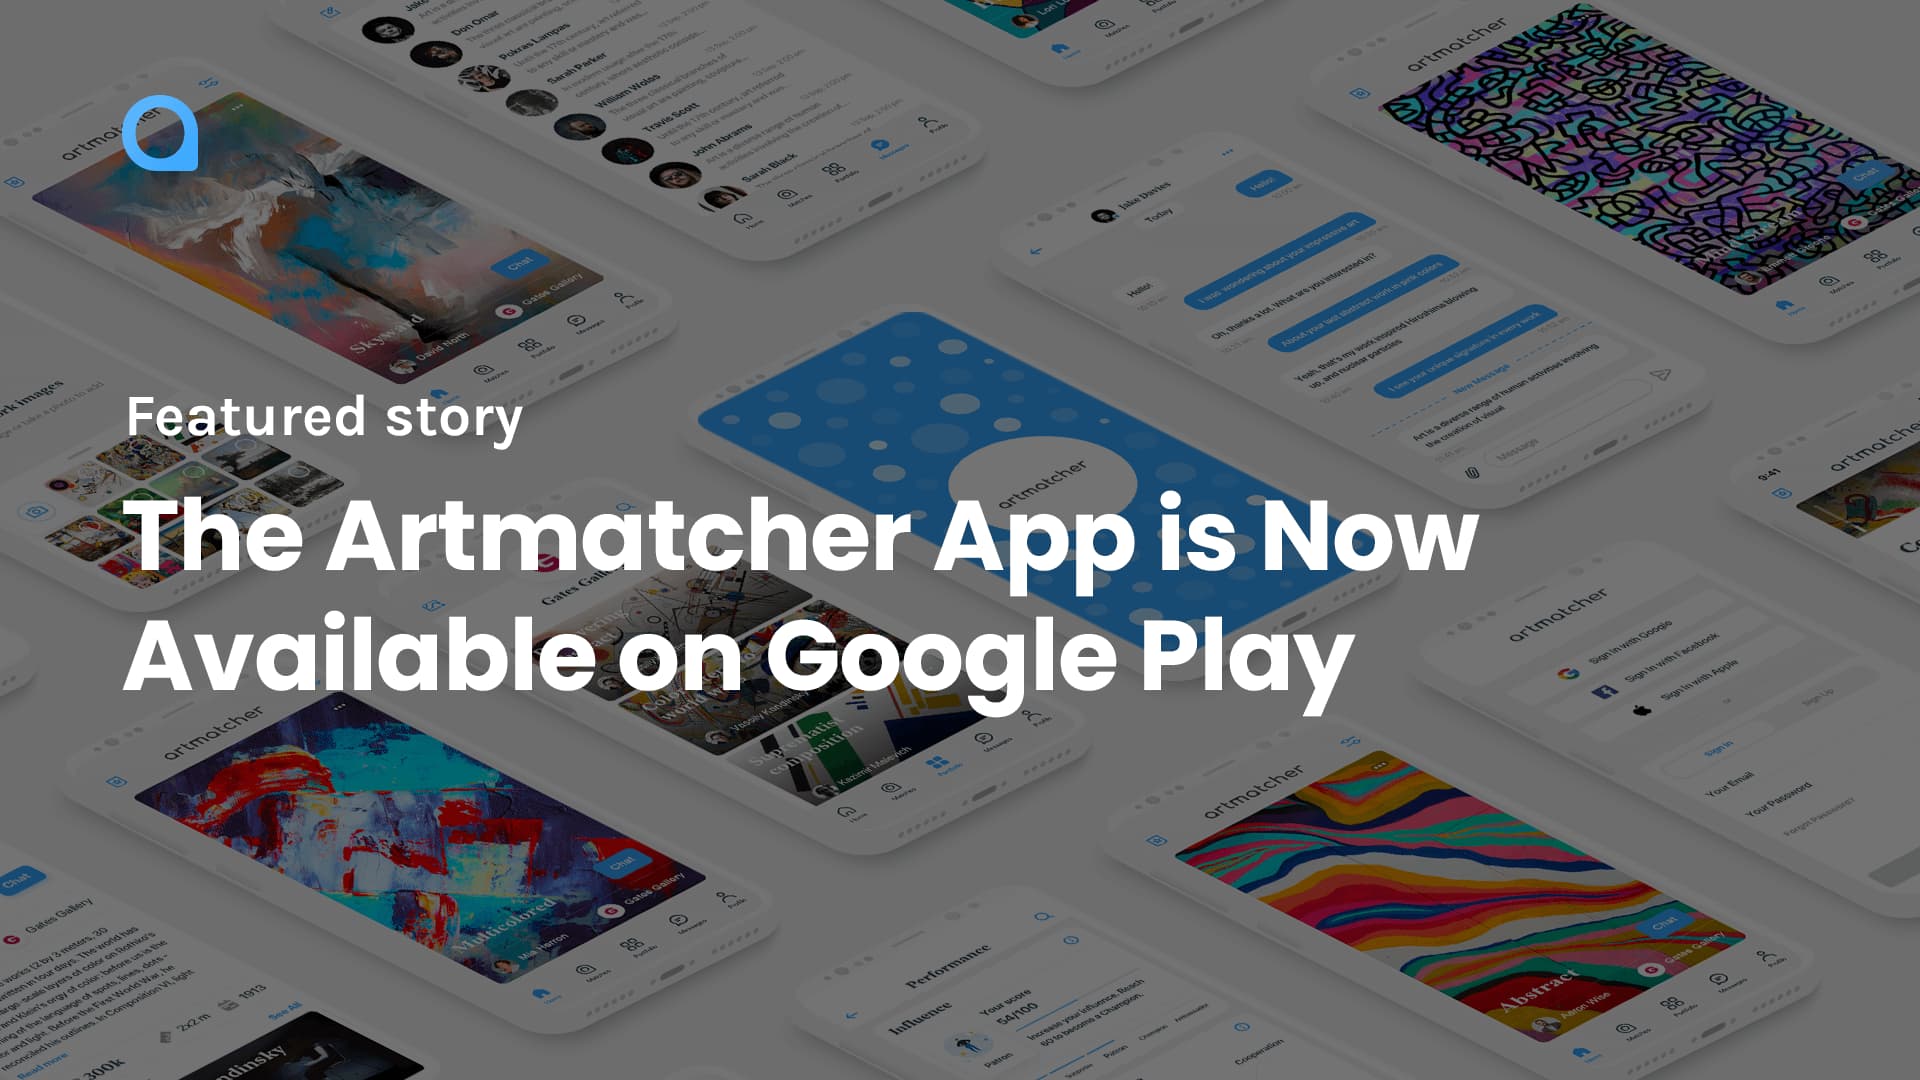 The Artmatcher App is Now Available in the Google Play Store